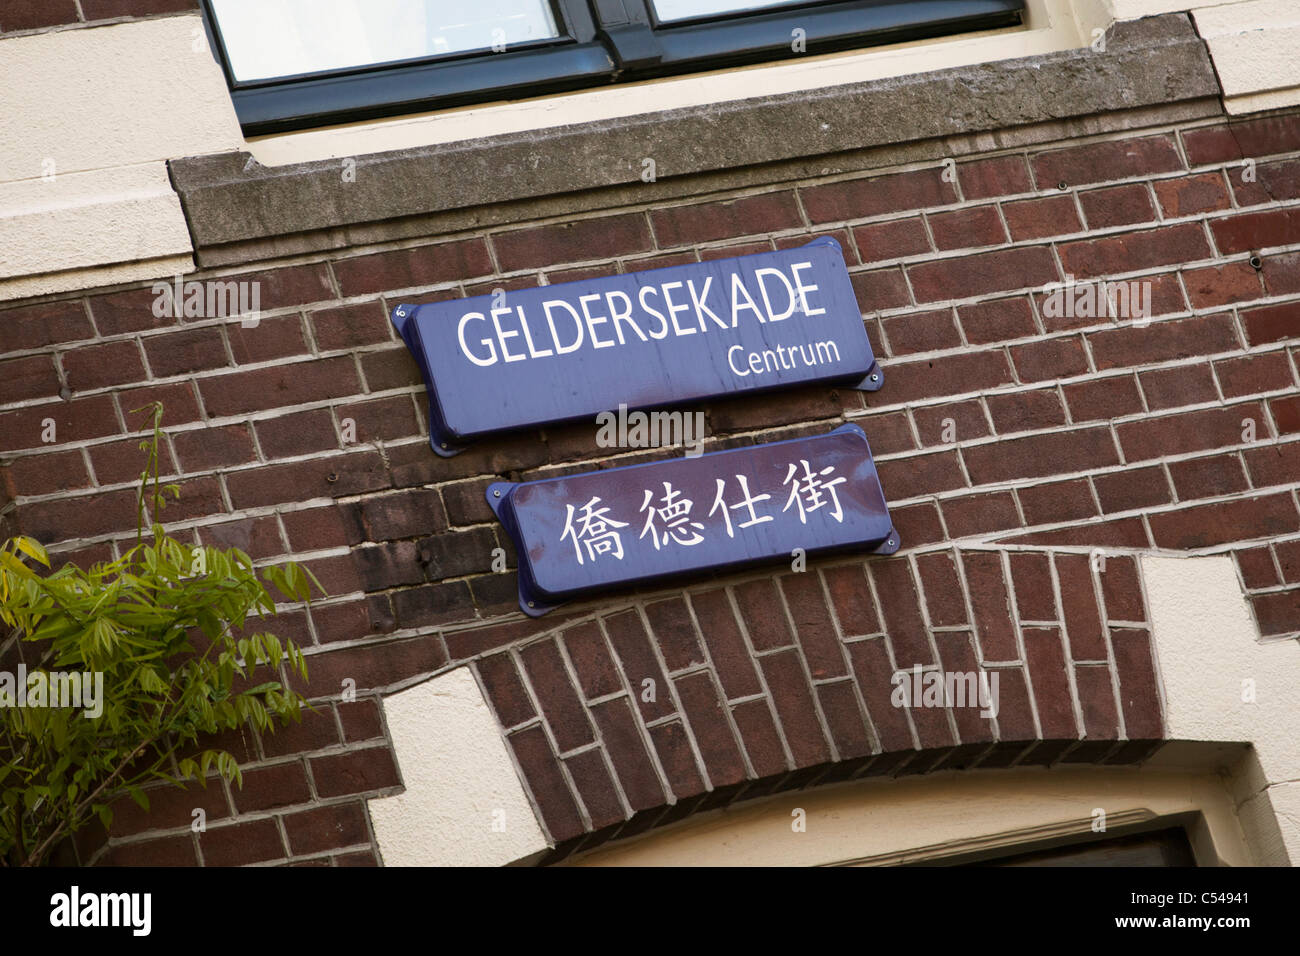 The Netherlands, Amsterdam, China town, roadsign in Dutch and Chinese. Stock Photo